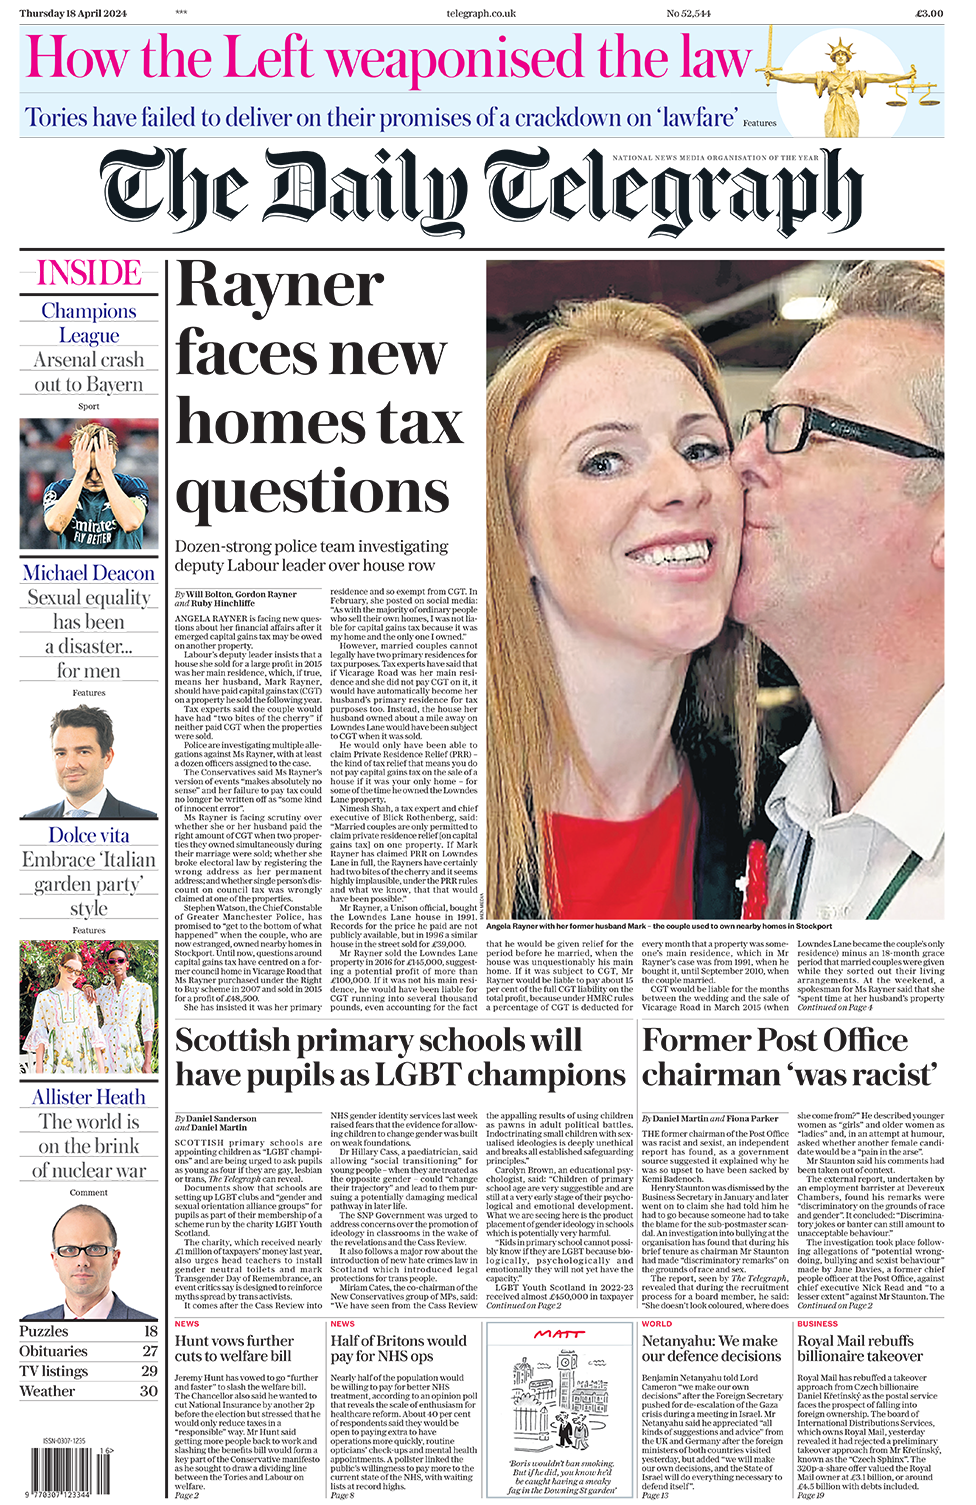 The headline in the Telegraph reads: "Rayner faces new homes tax questions".